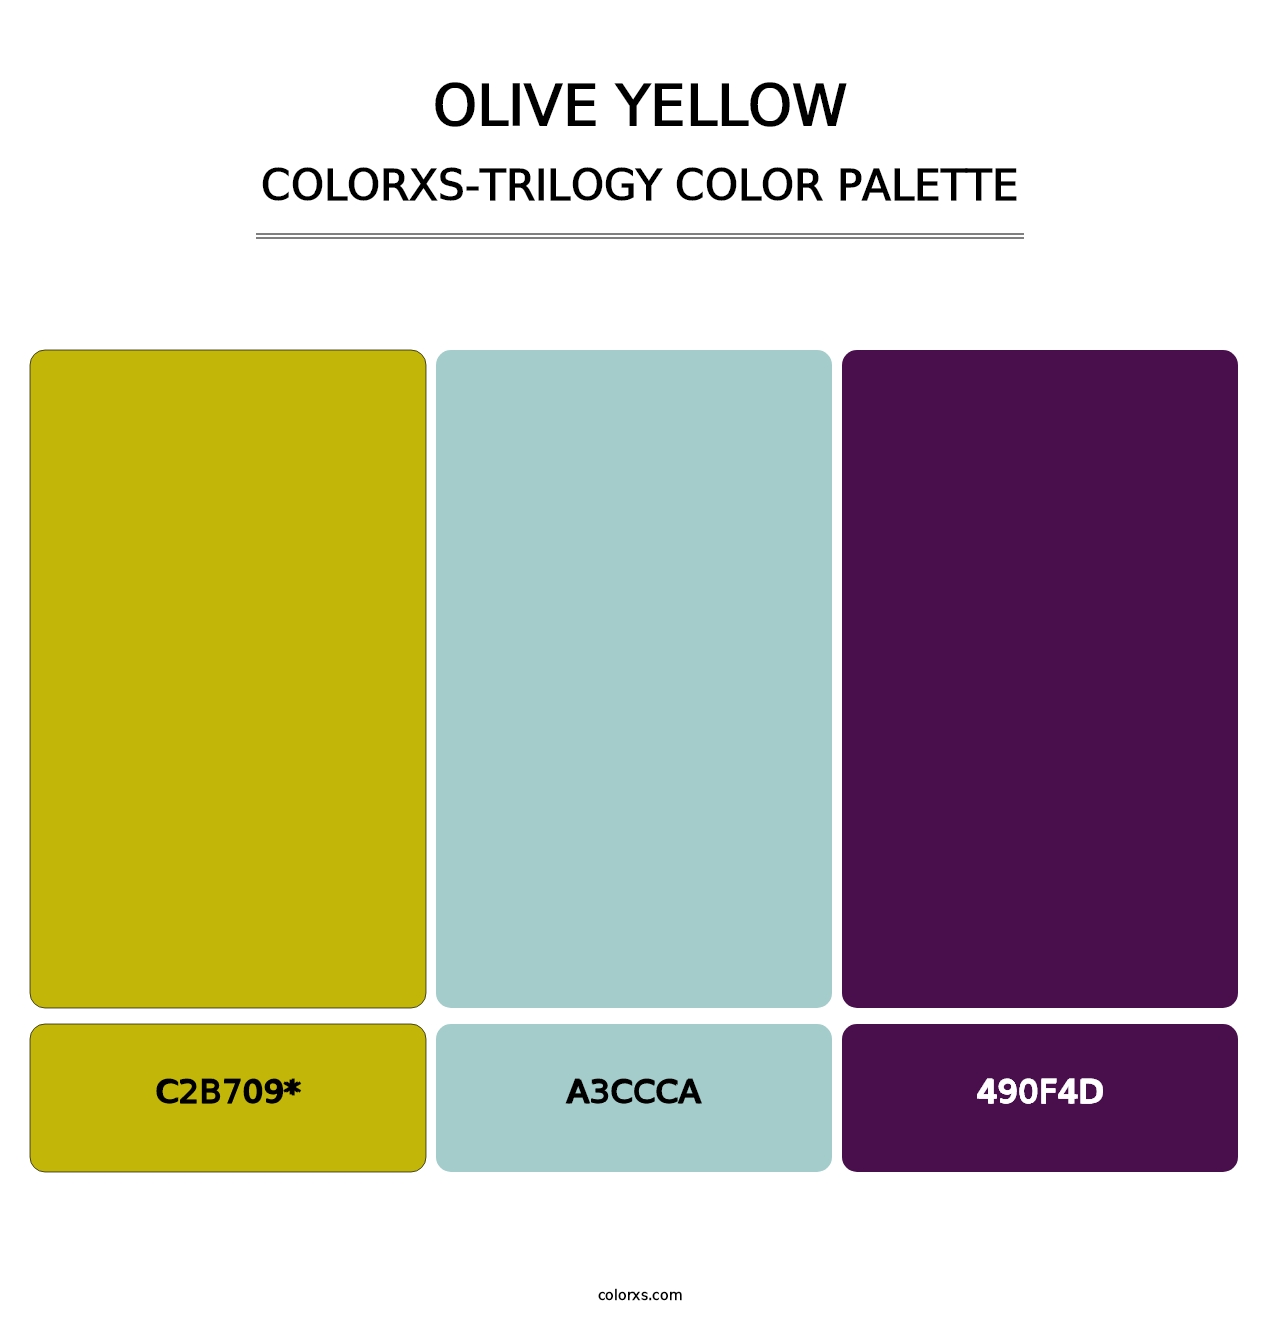 Olive Yellow - Colorxs Trilogy Palette